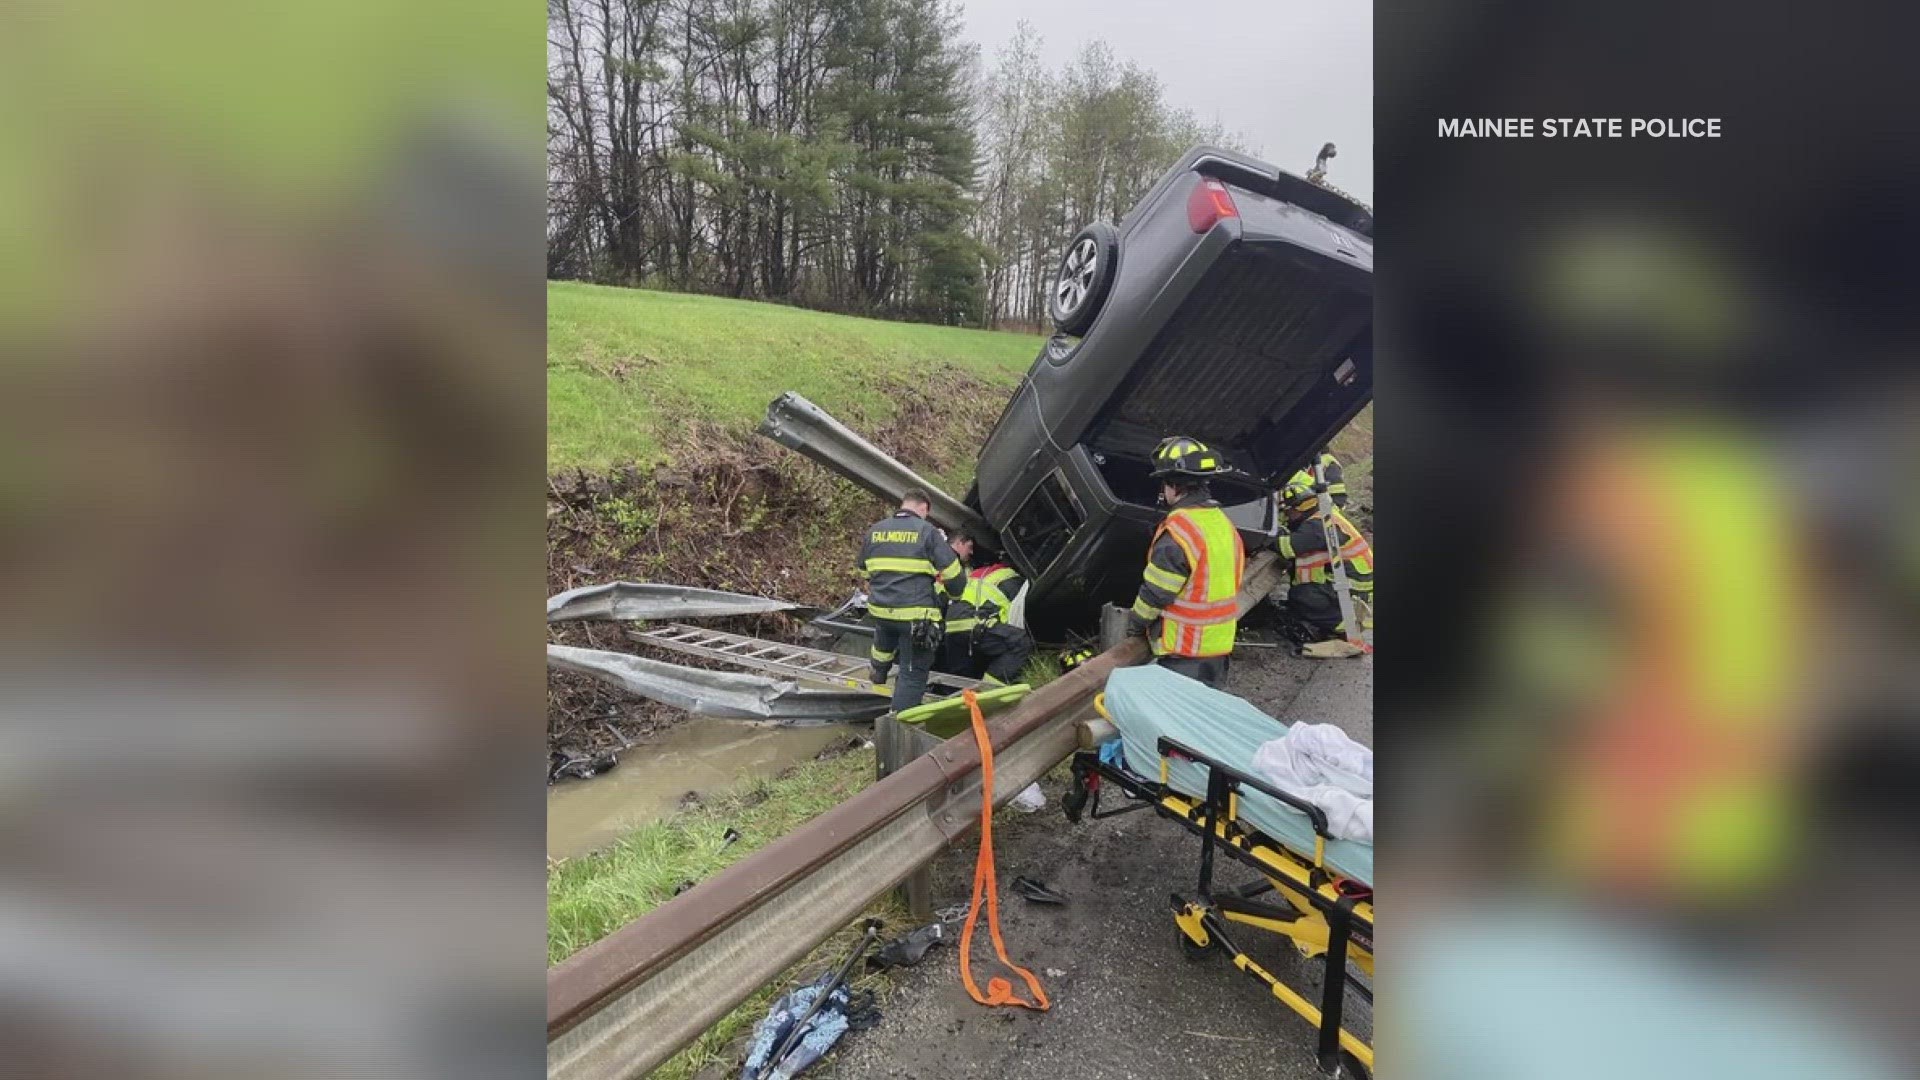 Police said Thomas Bosma was traveling northbound in the area of Exit 57 in Falmouth when he reportedly got distracted and hit a guardrail, upending his truck.